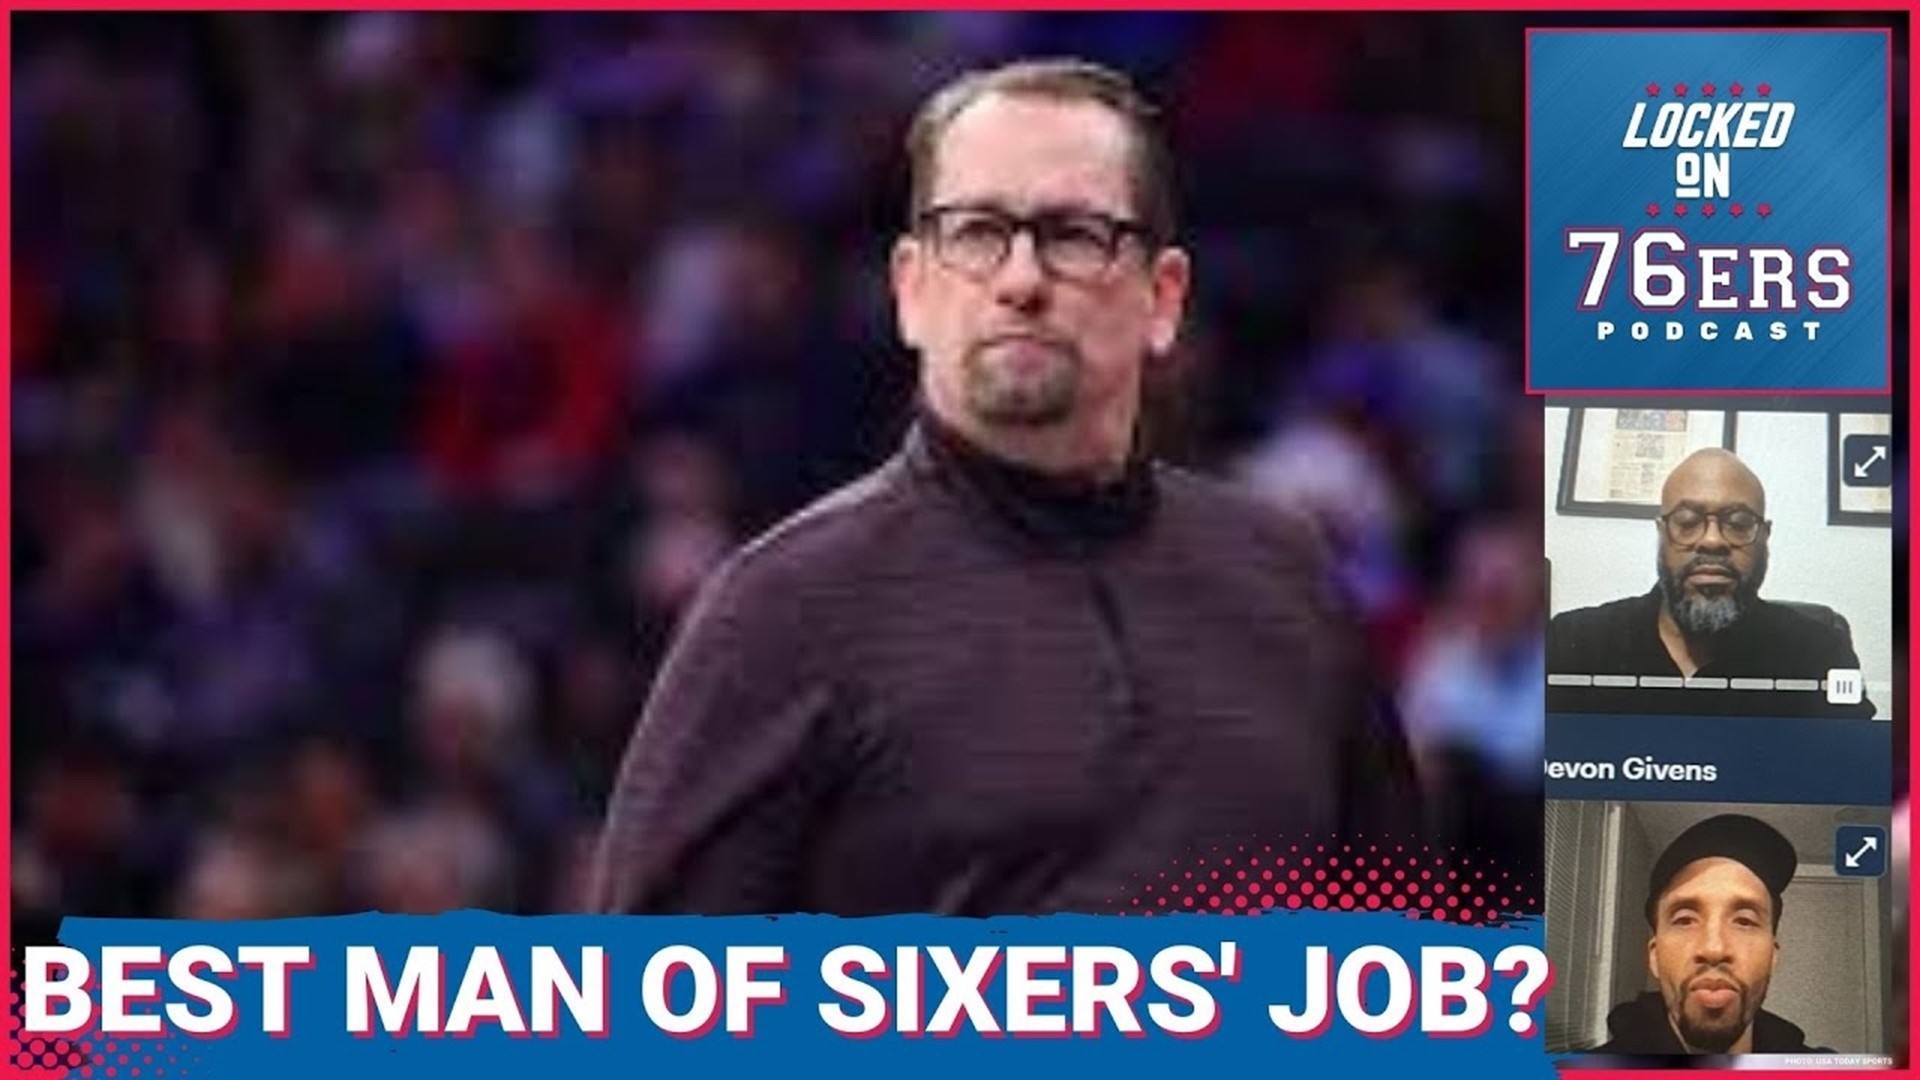 Who should the 76ers hire as head coach? What's the deal with James Harden? Devon Givens and Keith Pompey discuss that and more.